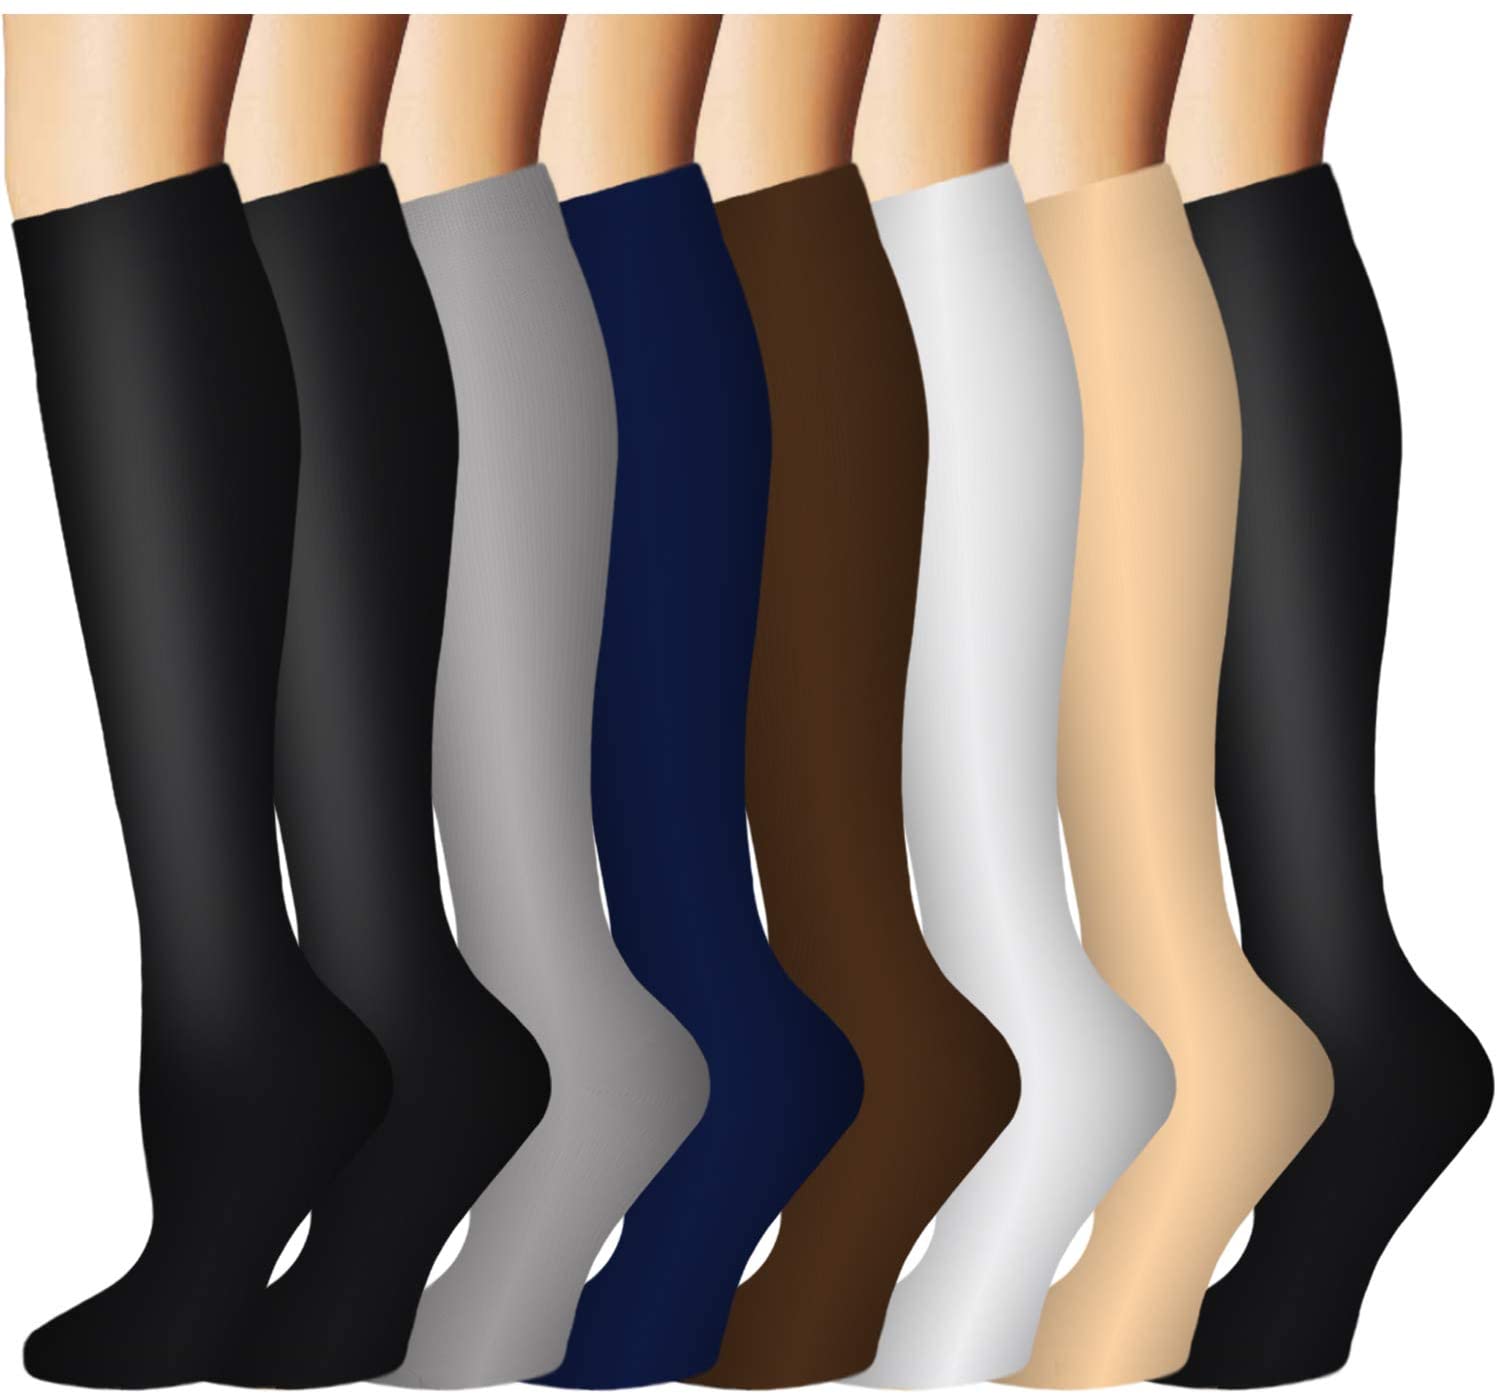 4 Pairs Compression Socks for Men and Women 20-30 mmHg Compression Stockings  